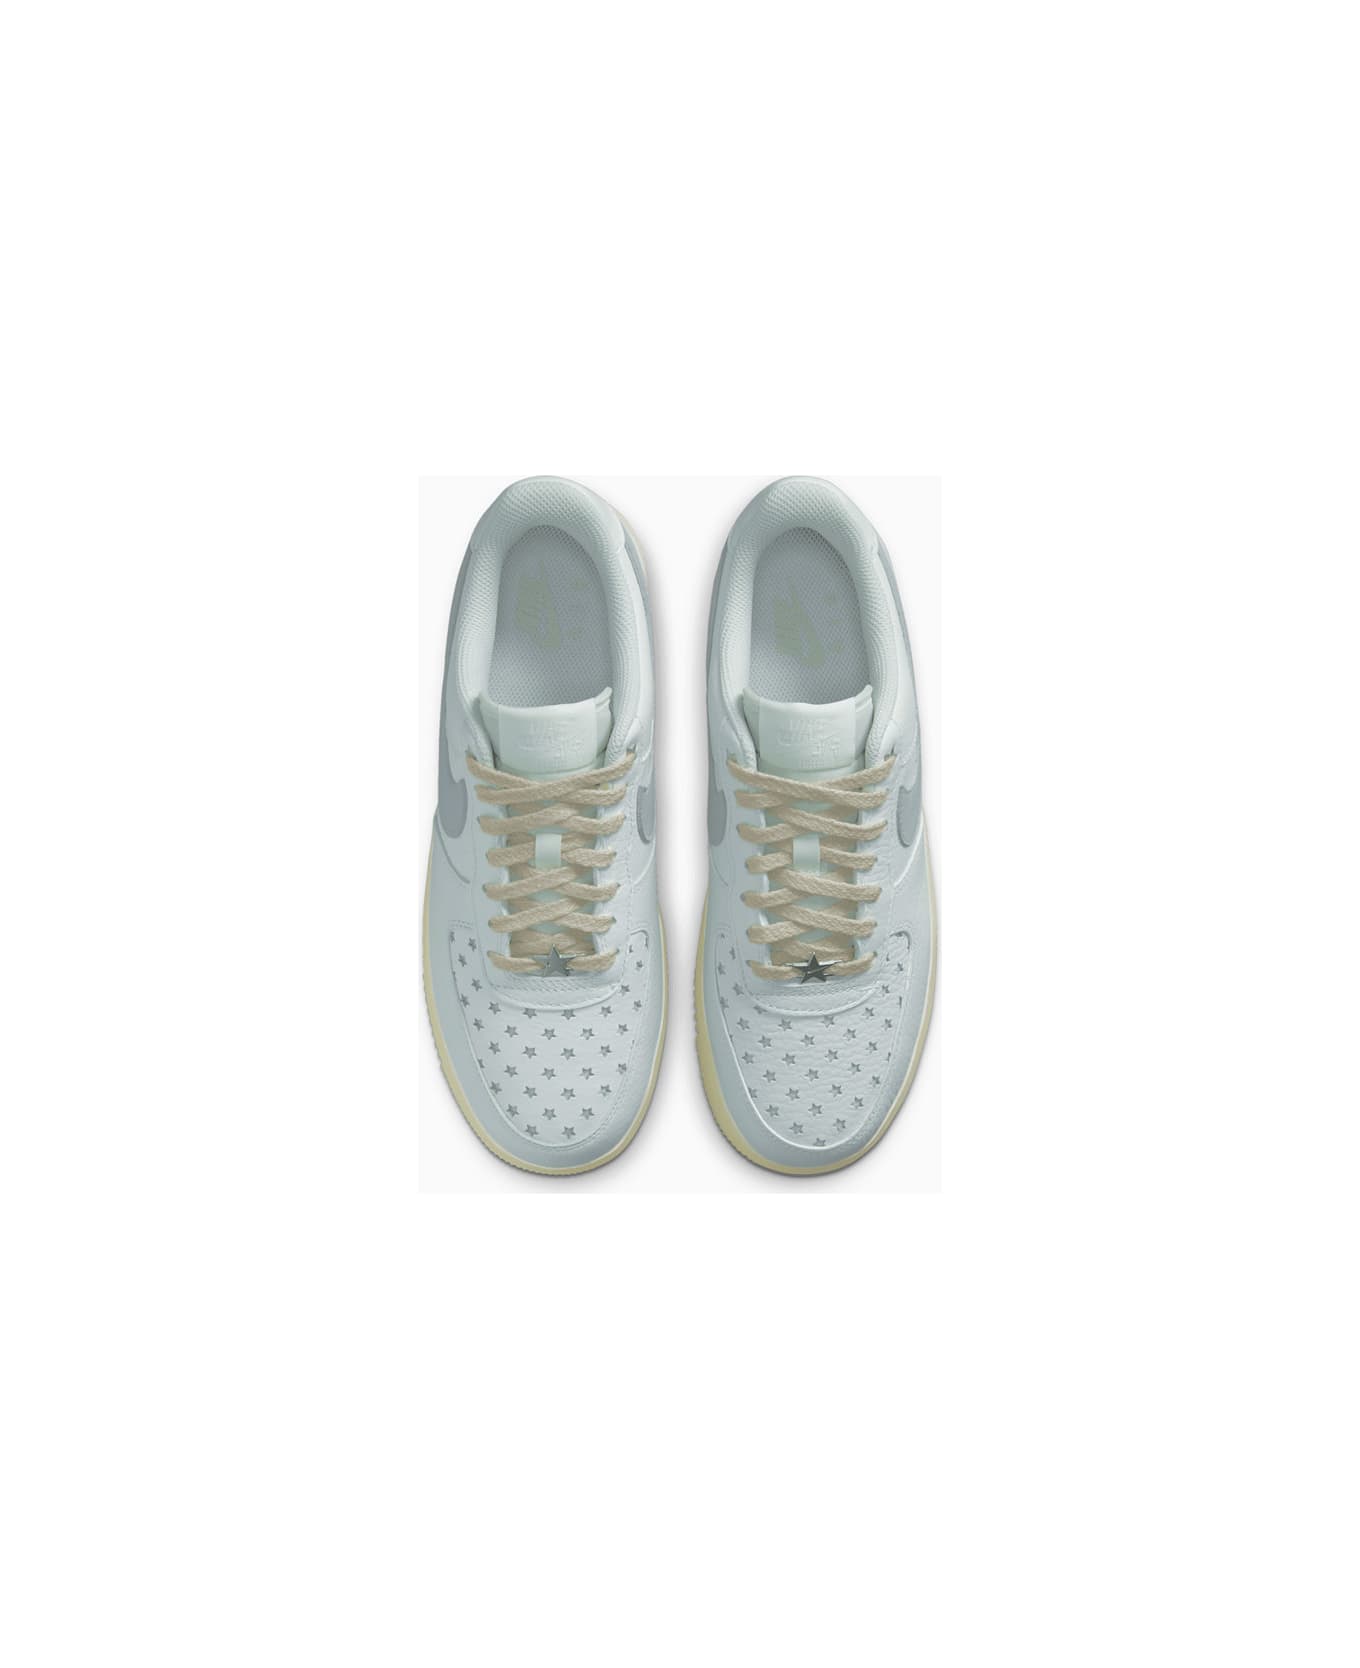 Nike Air Force 1 '07 Sneakers Fd0793-100 - White